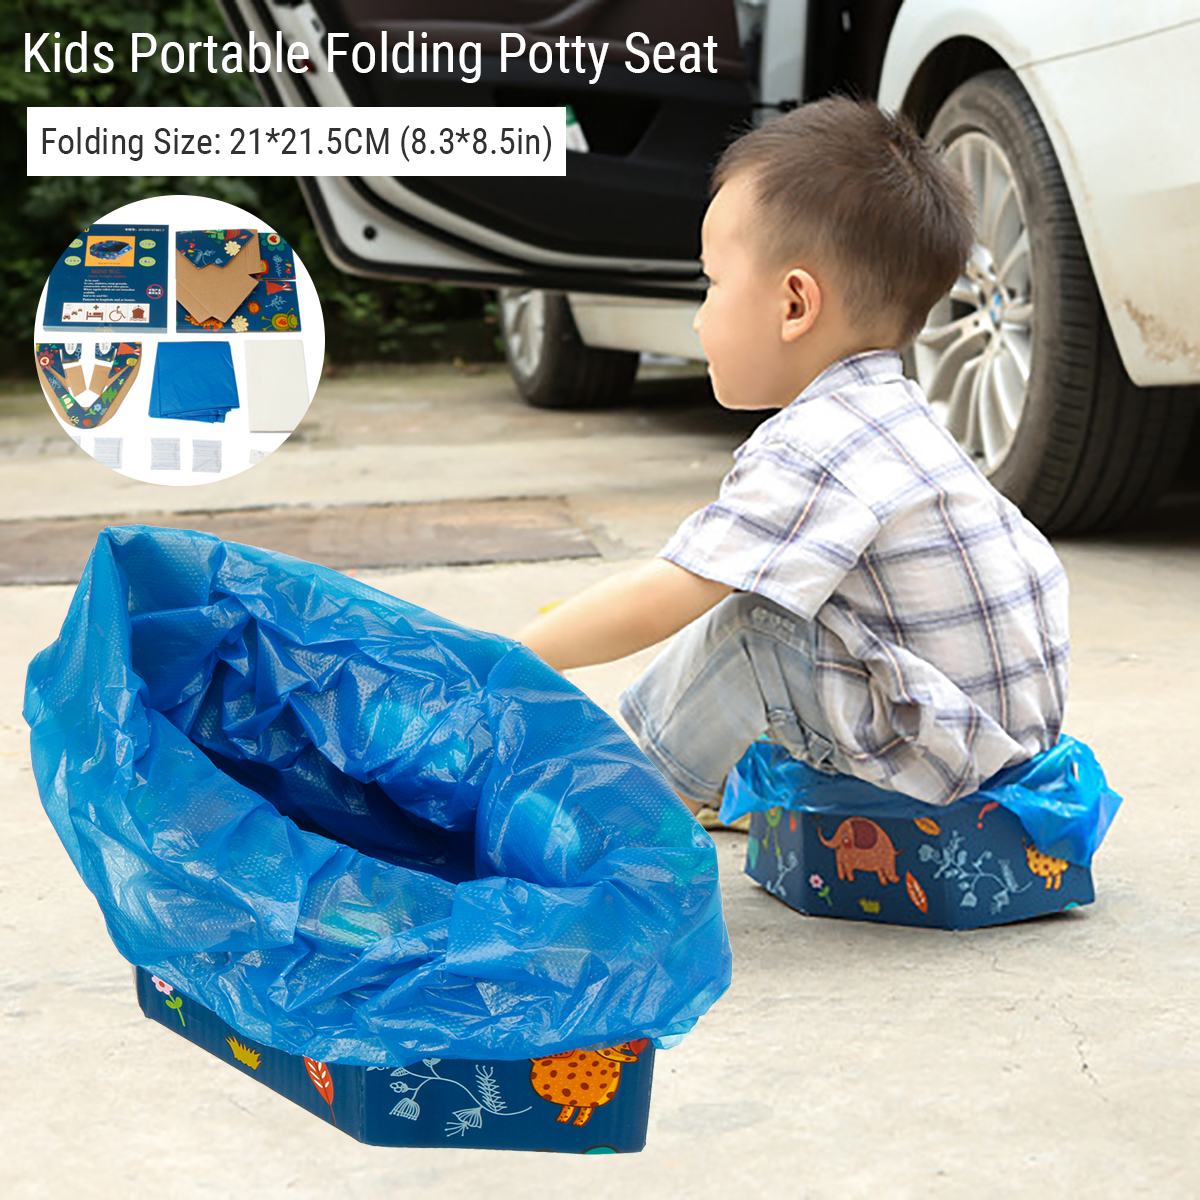 Portable-Baby-Potty-Toilet-Training-Kids-Comfortable-Travel-For-Use-4-Times-1622788-1